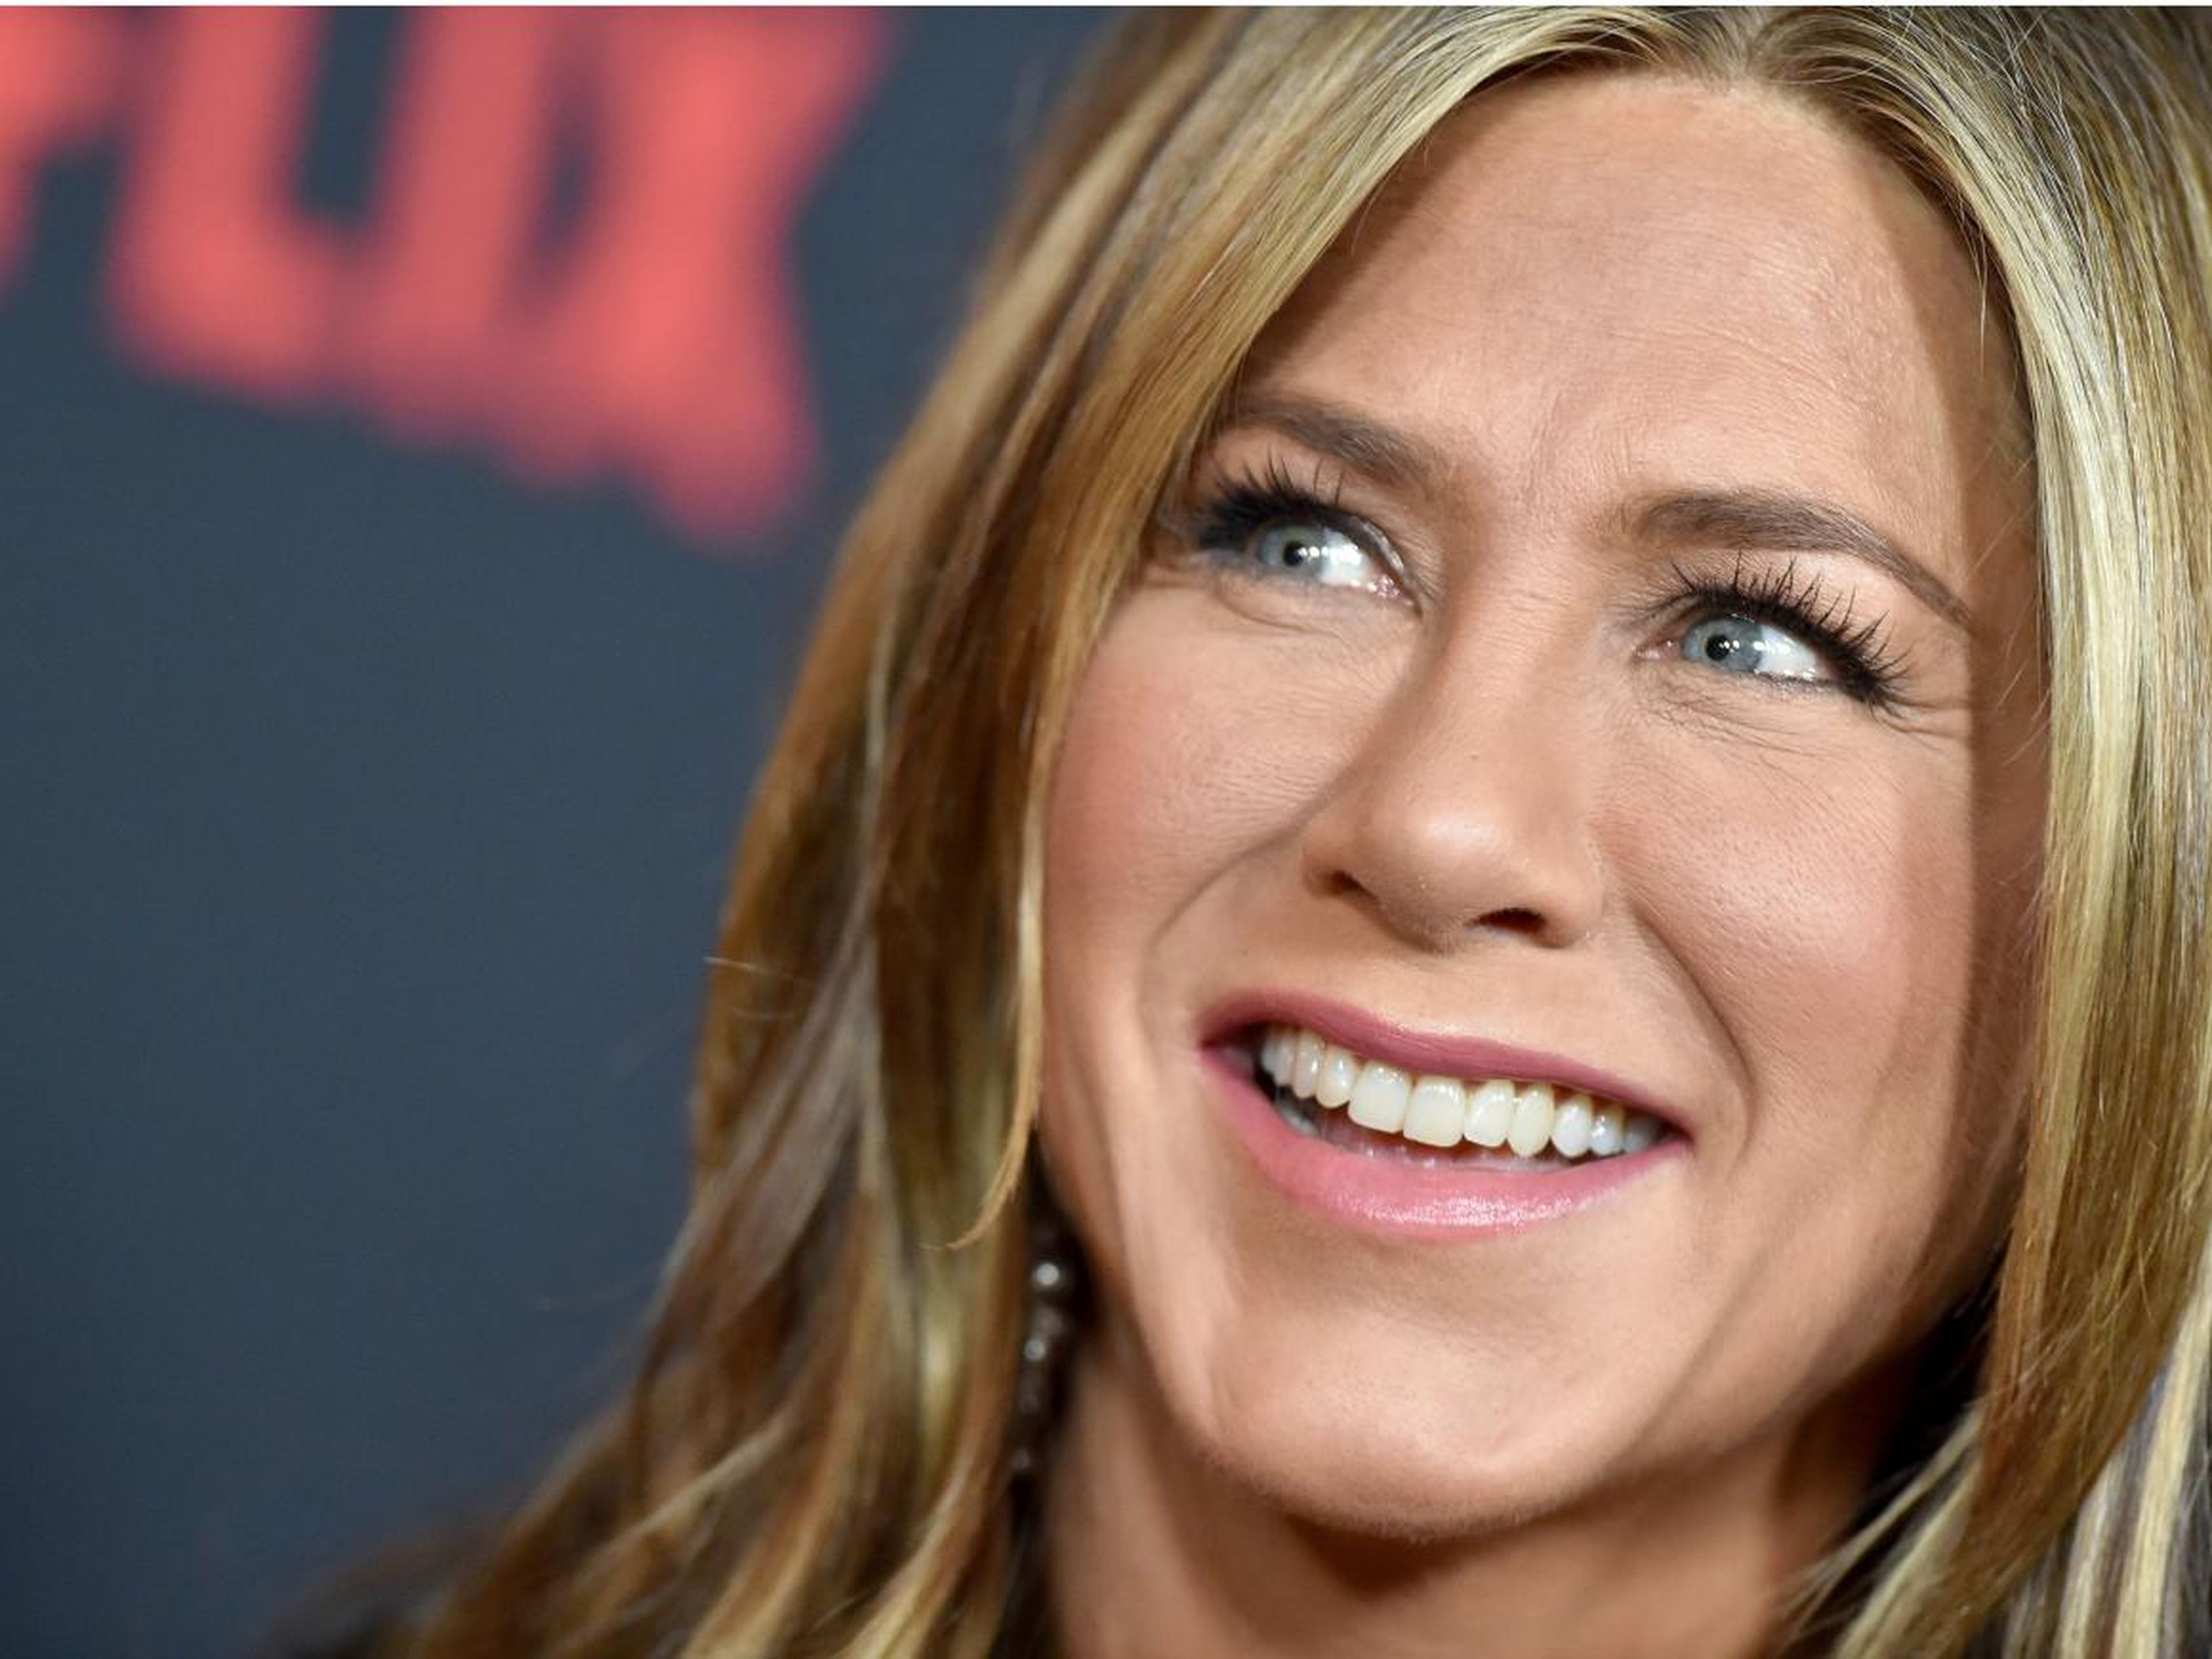 Aniston also has a notoriously large beauty budget. In 2012, Total Beauty estimated that Aniston spends over $140,000 a year on her beauty and skincare routines, based on previous reports of her spending.